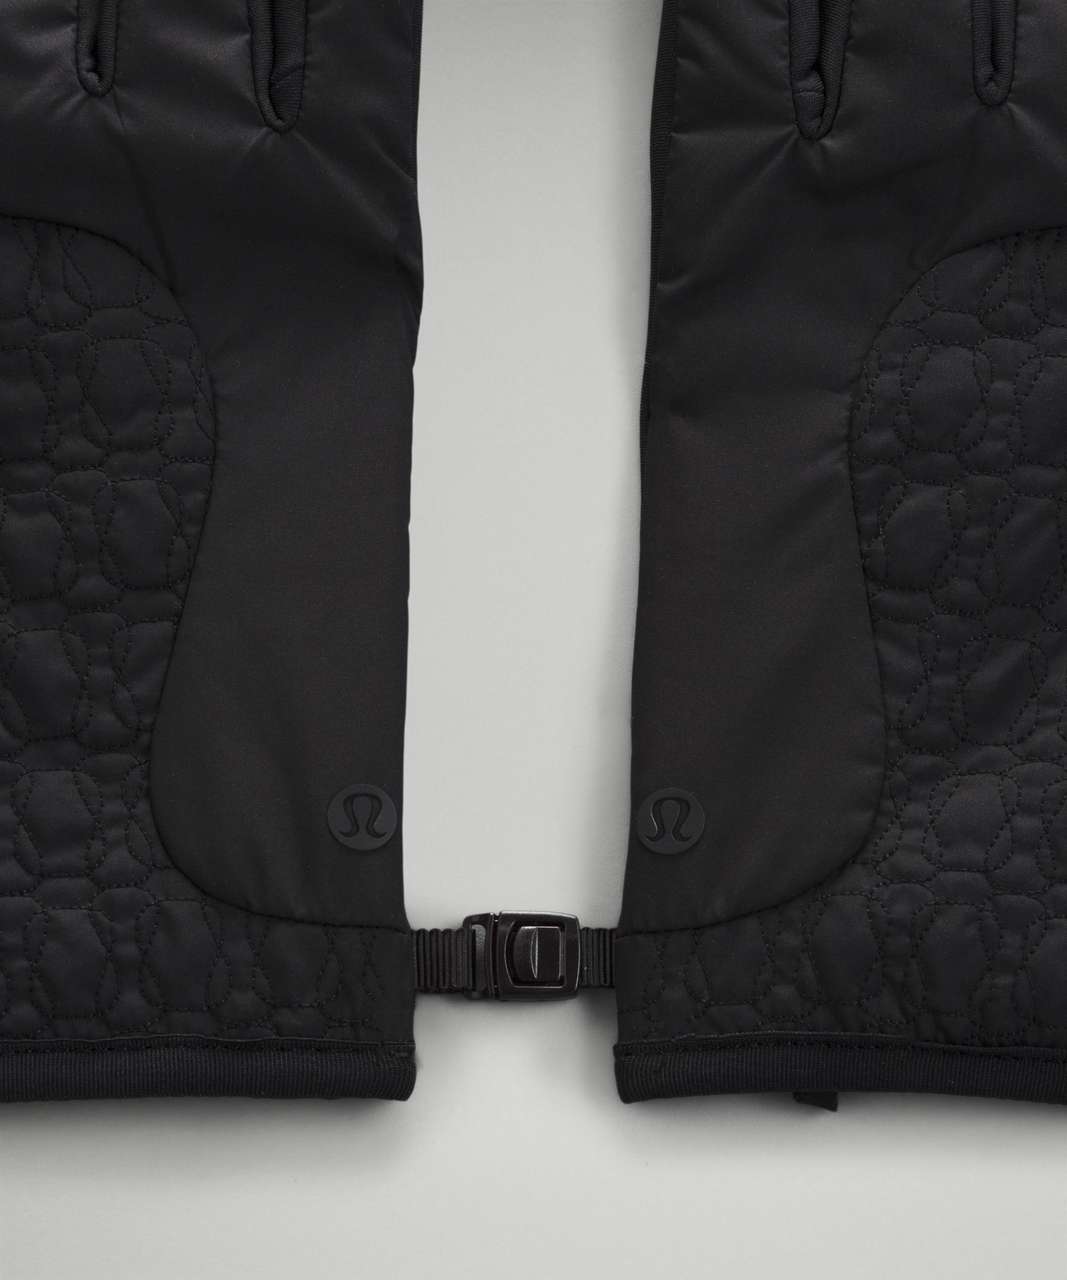 Lululemon Insulated Quilted Gloves - Black